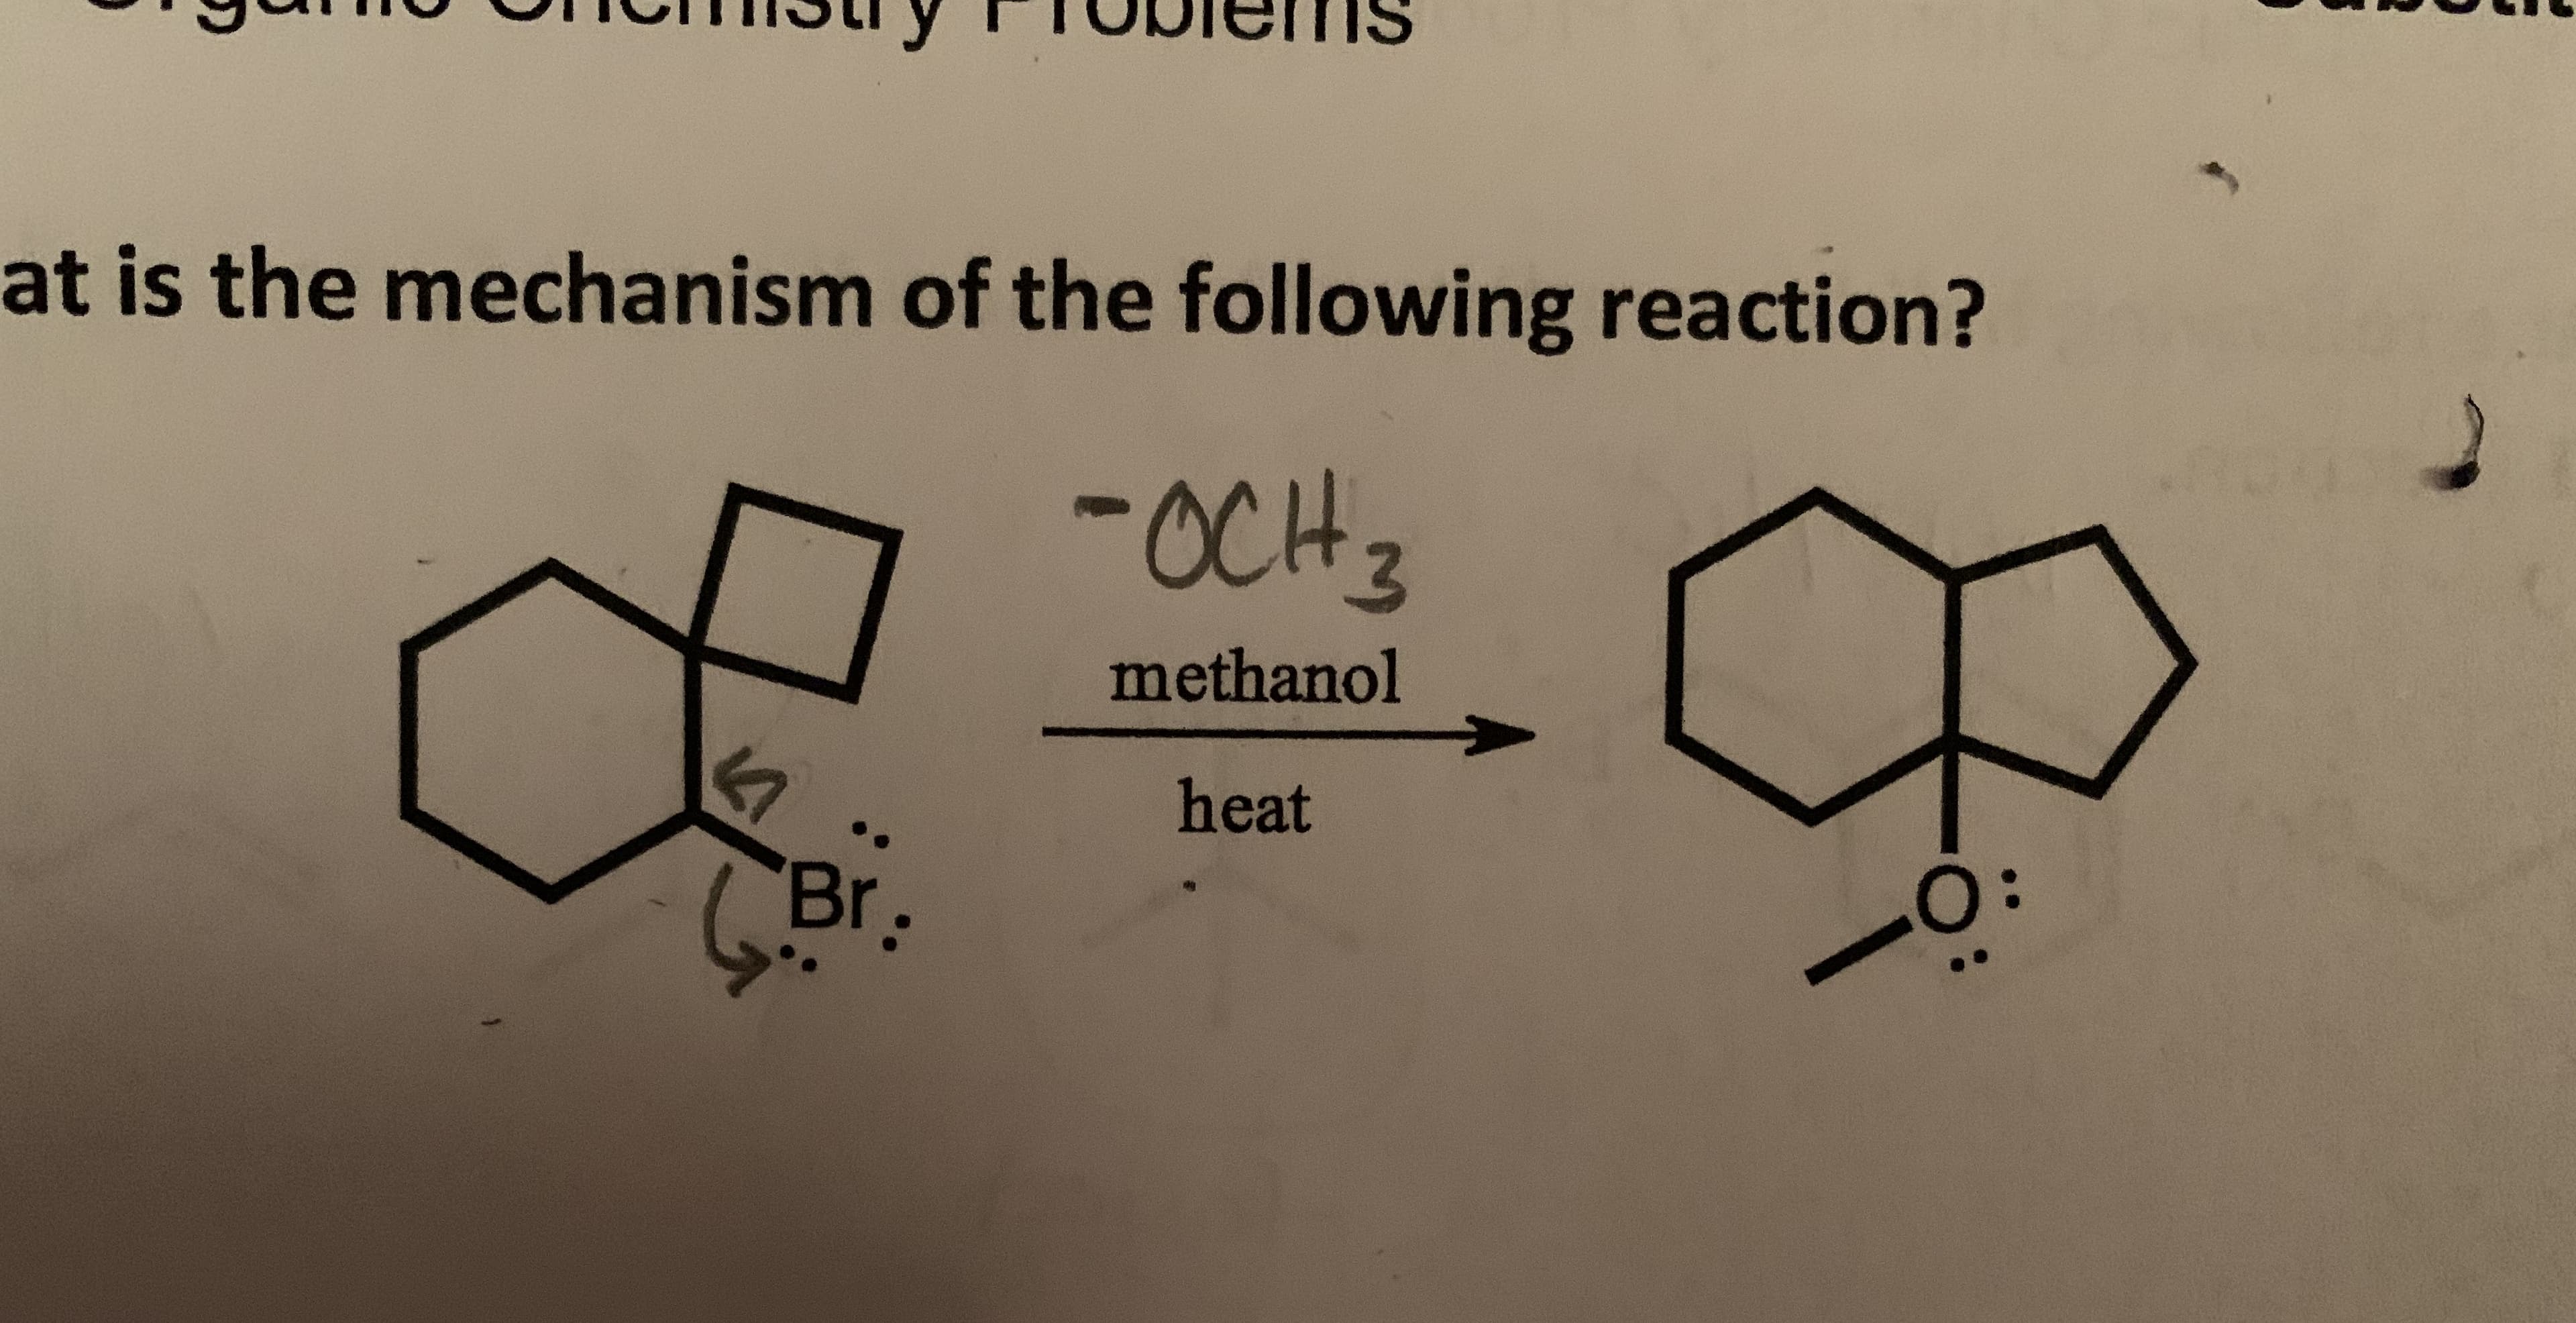 at is the mechanism of the following reaction?
-OCH
3
methanol
heat
Br
